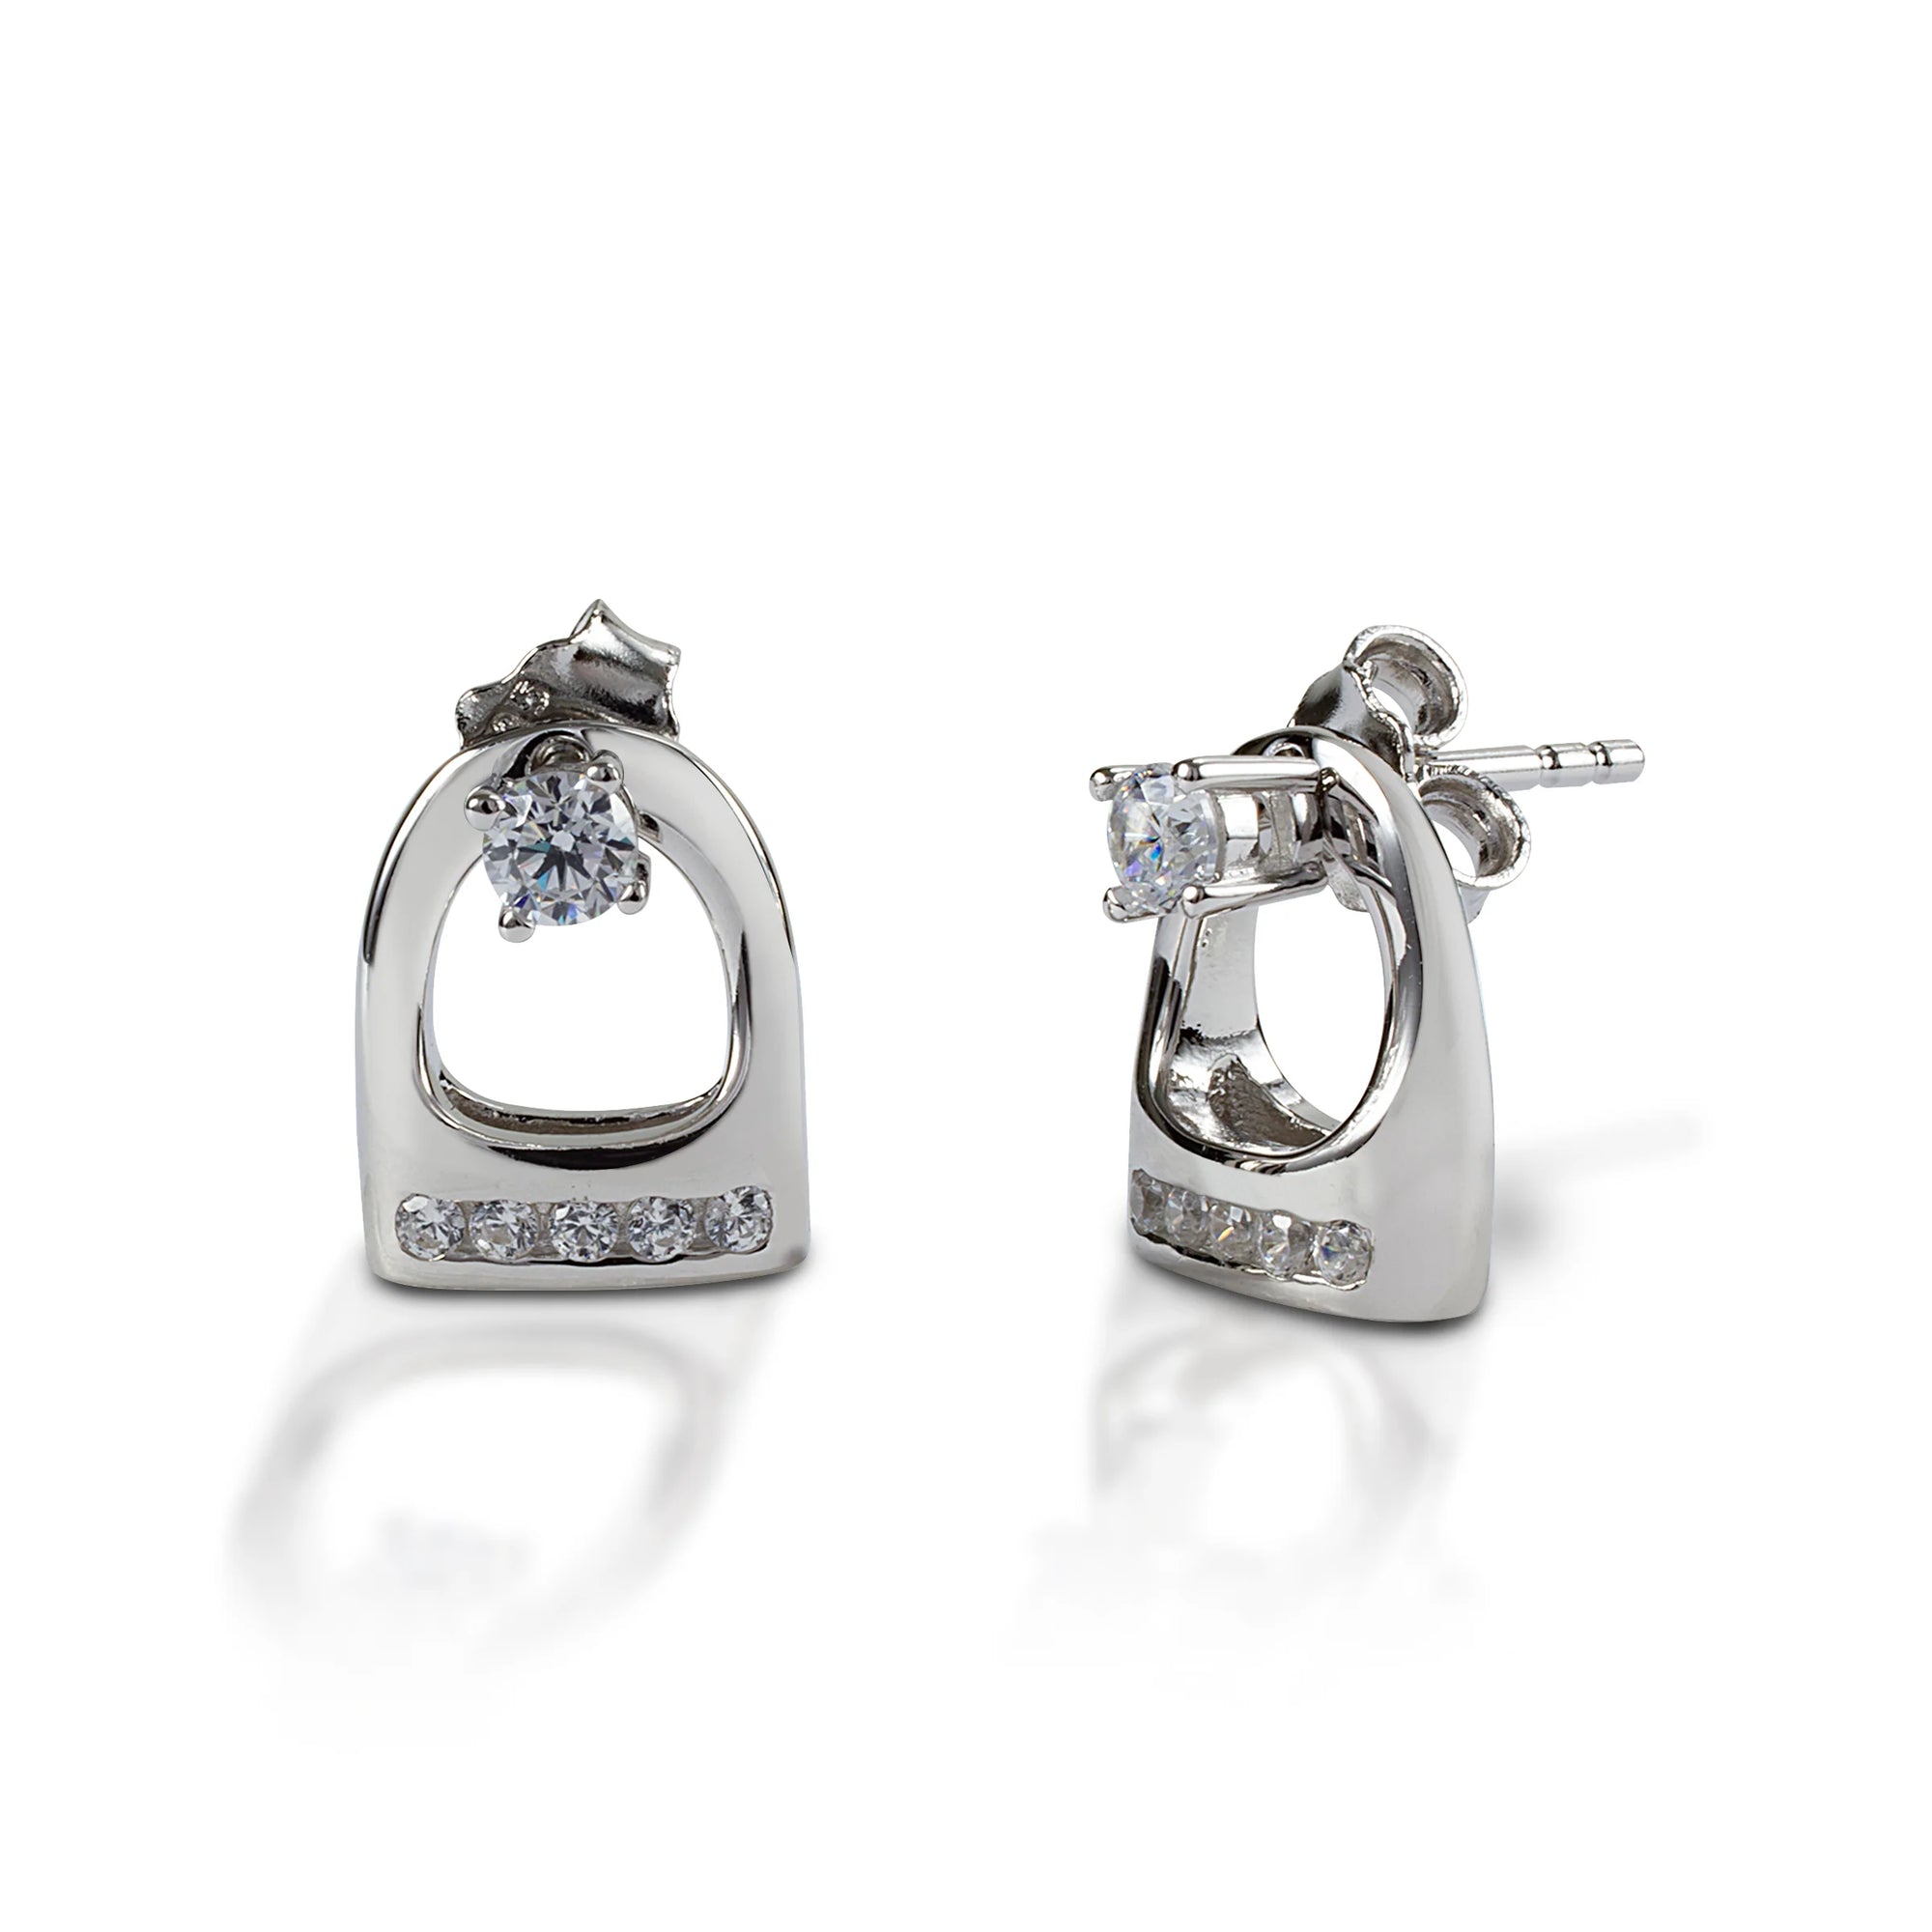 Kelly Herd Stud Earrings with Small English Stirrup Jackets STYLE 13G